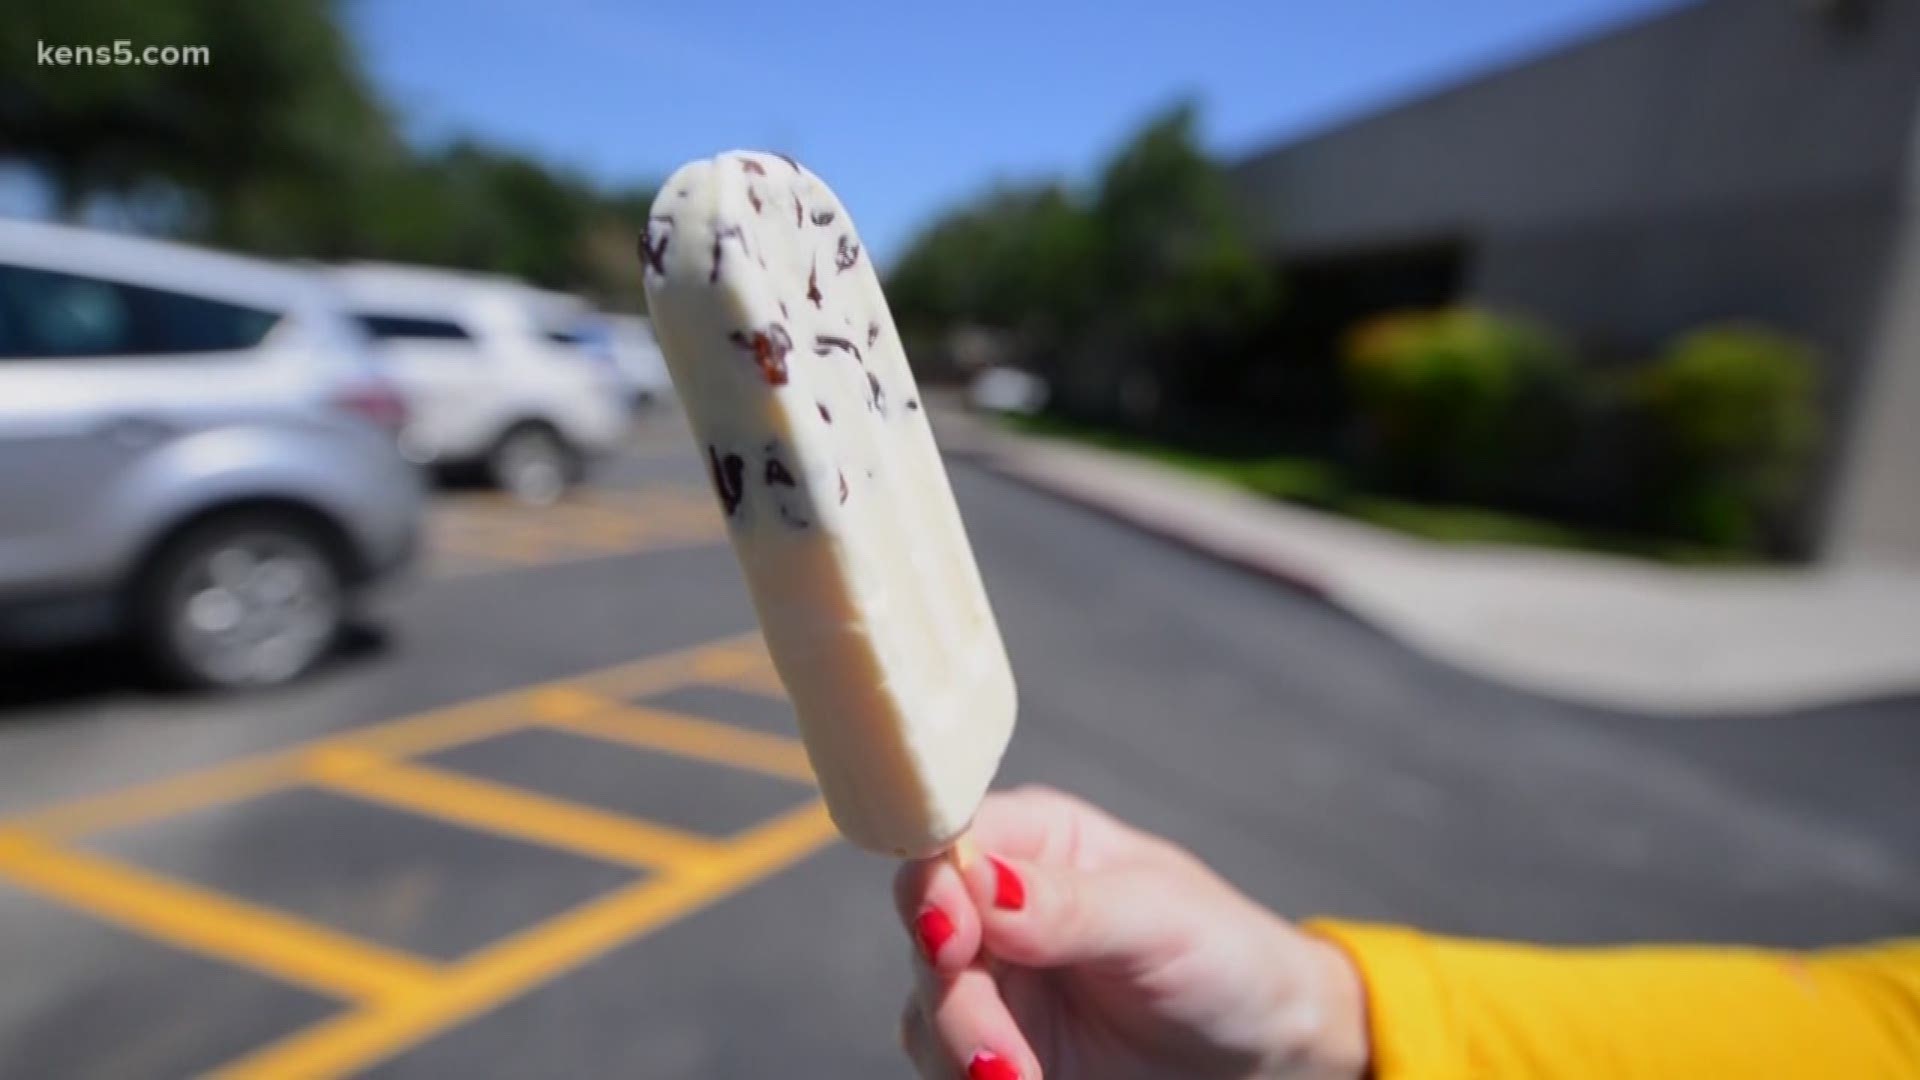 If you're looking to stay cool this summer with some local sweet treats, look no further! Digital Journalists Lexi Hazlett and Jackson Floyd along with KENS 5 producer Mike Vela, visited two paleta businesses that are creating a lot of buzz in the Alamo City!